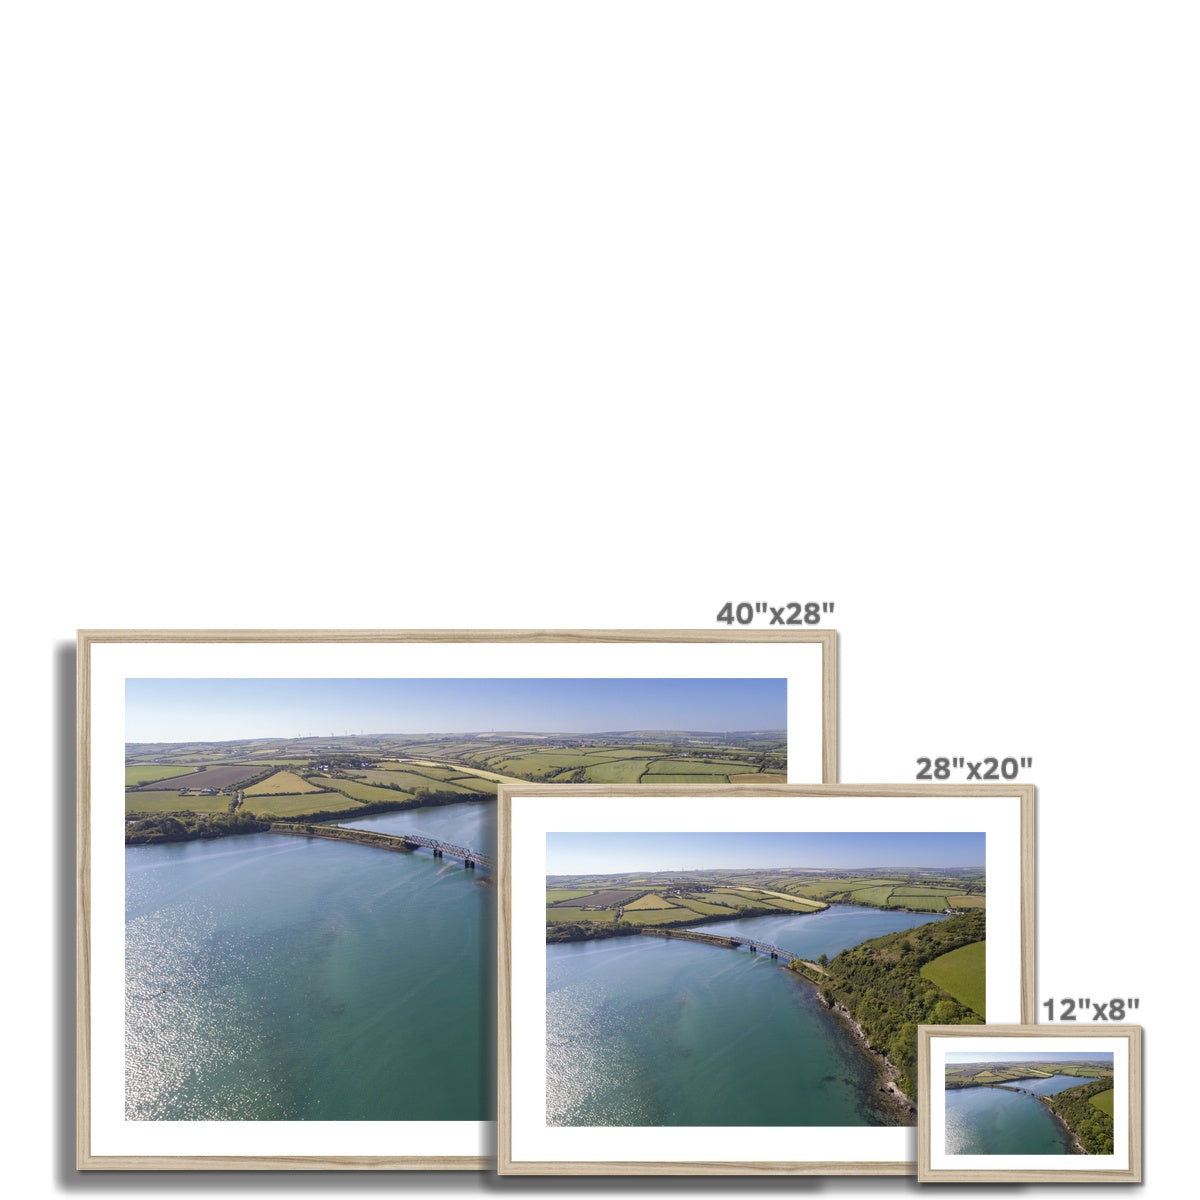 padstow framed photograph